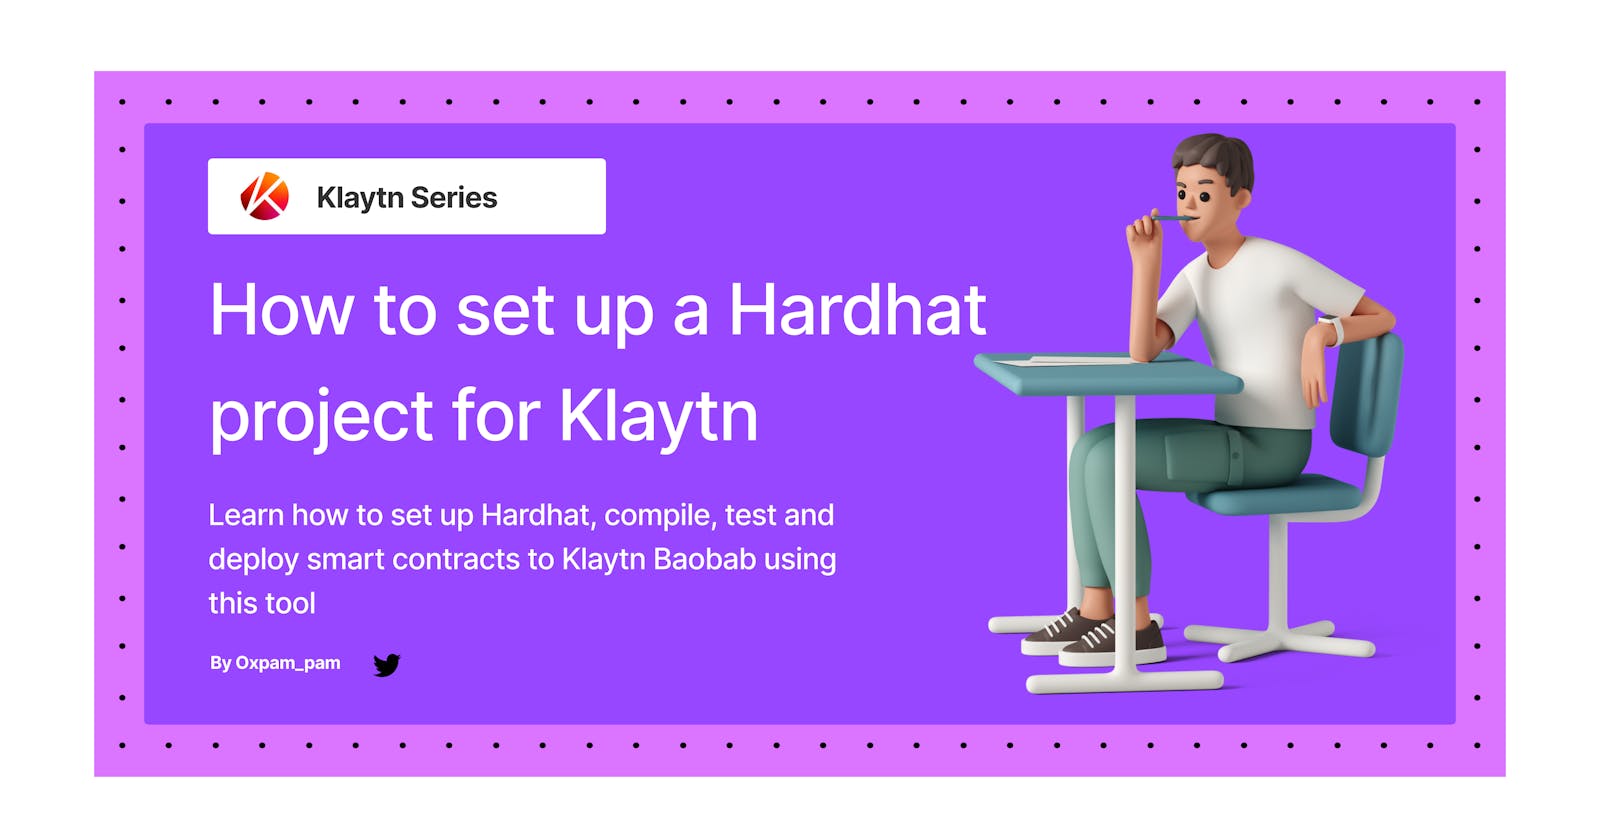 How to set up a Hardhat project for Klaytn